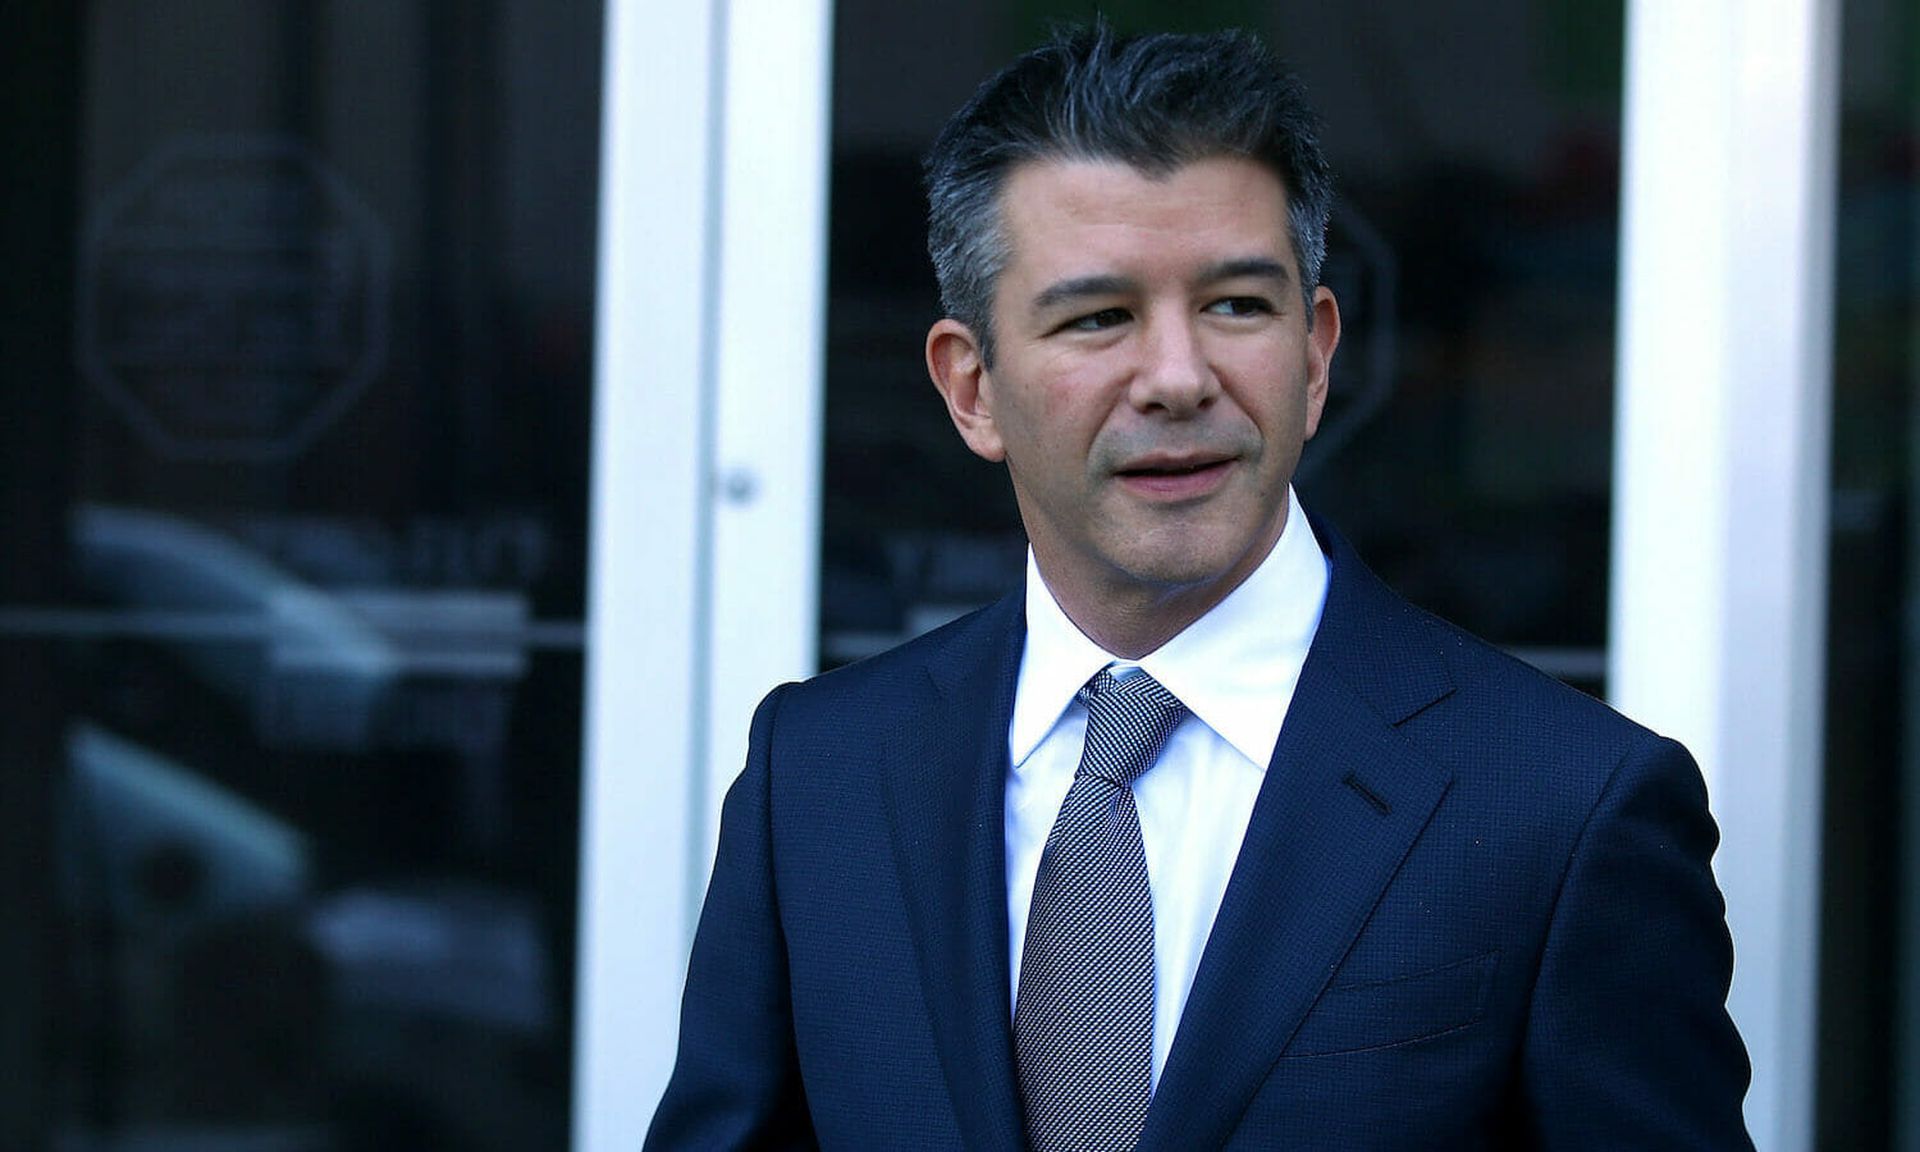 Former Uber CEO Travis Kalanick, seen here in 2018, was supposedly aware of the circumstances of an extortion payment made to hackers. (Photo by Justin Sullivan/Getty Images)